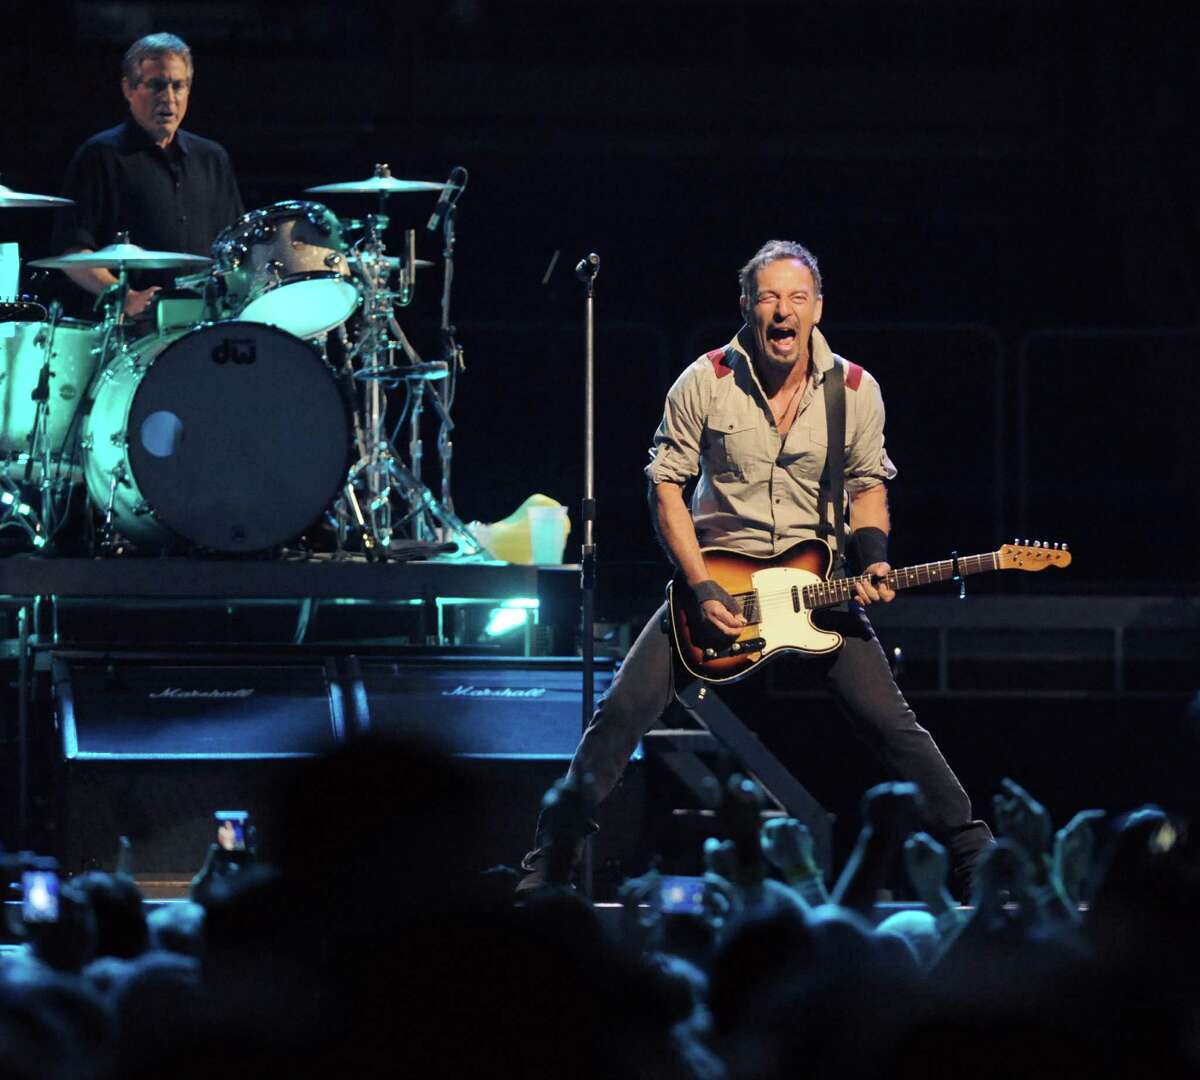 Click through for a gallery of images of Bruce Springsteen concerts in the Capital Region through the years. Springsteen, right, and The E Street Band perform at the Times Union Center on Tuesday May 13, 2014 in Albany, N.Y. (Michael P. Farrell/Times Union)